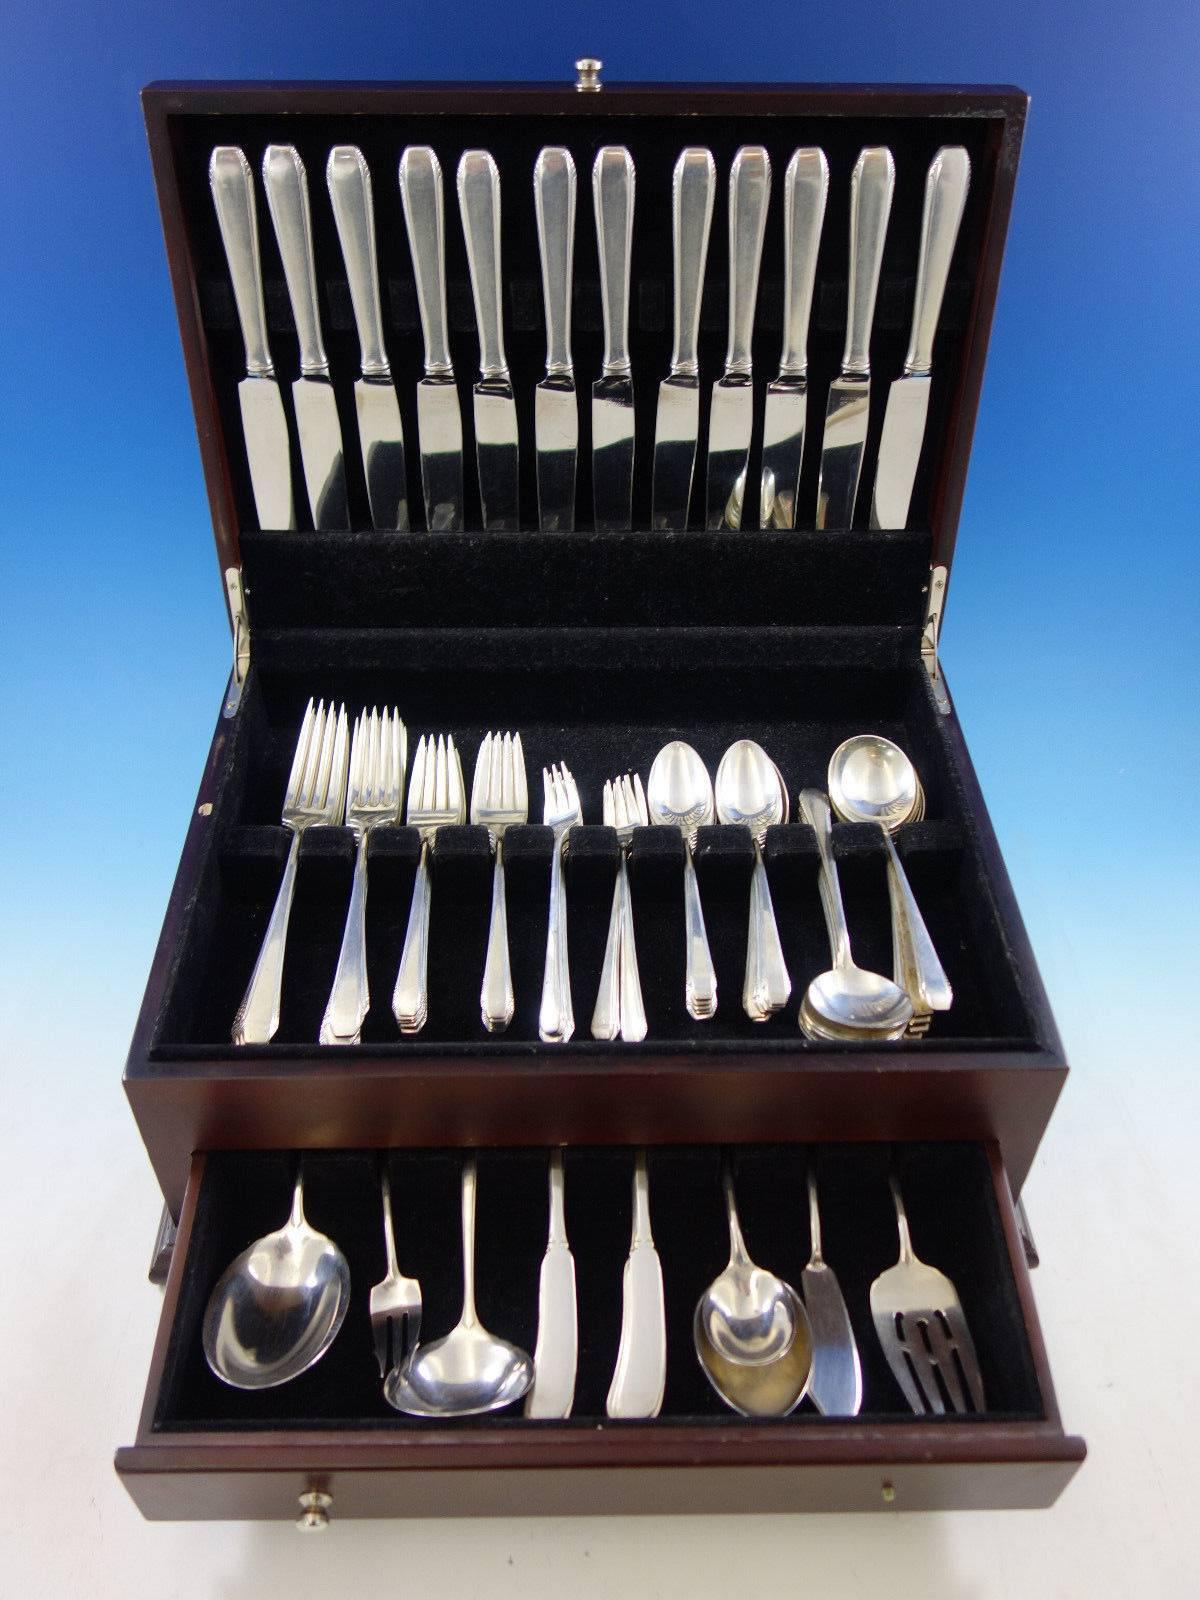 Cascade by Towle sterling silver flatware set, 91 pieces. This set includes: 

12 dinner size knives, 9 3/4